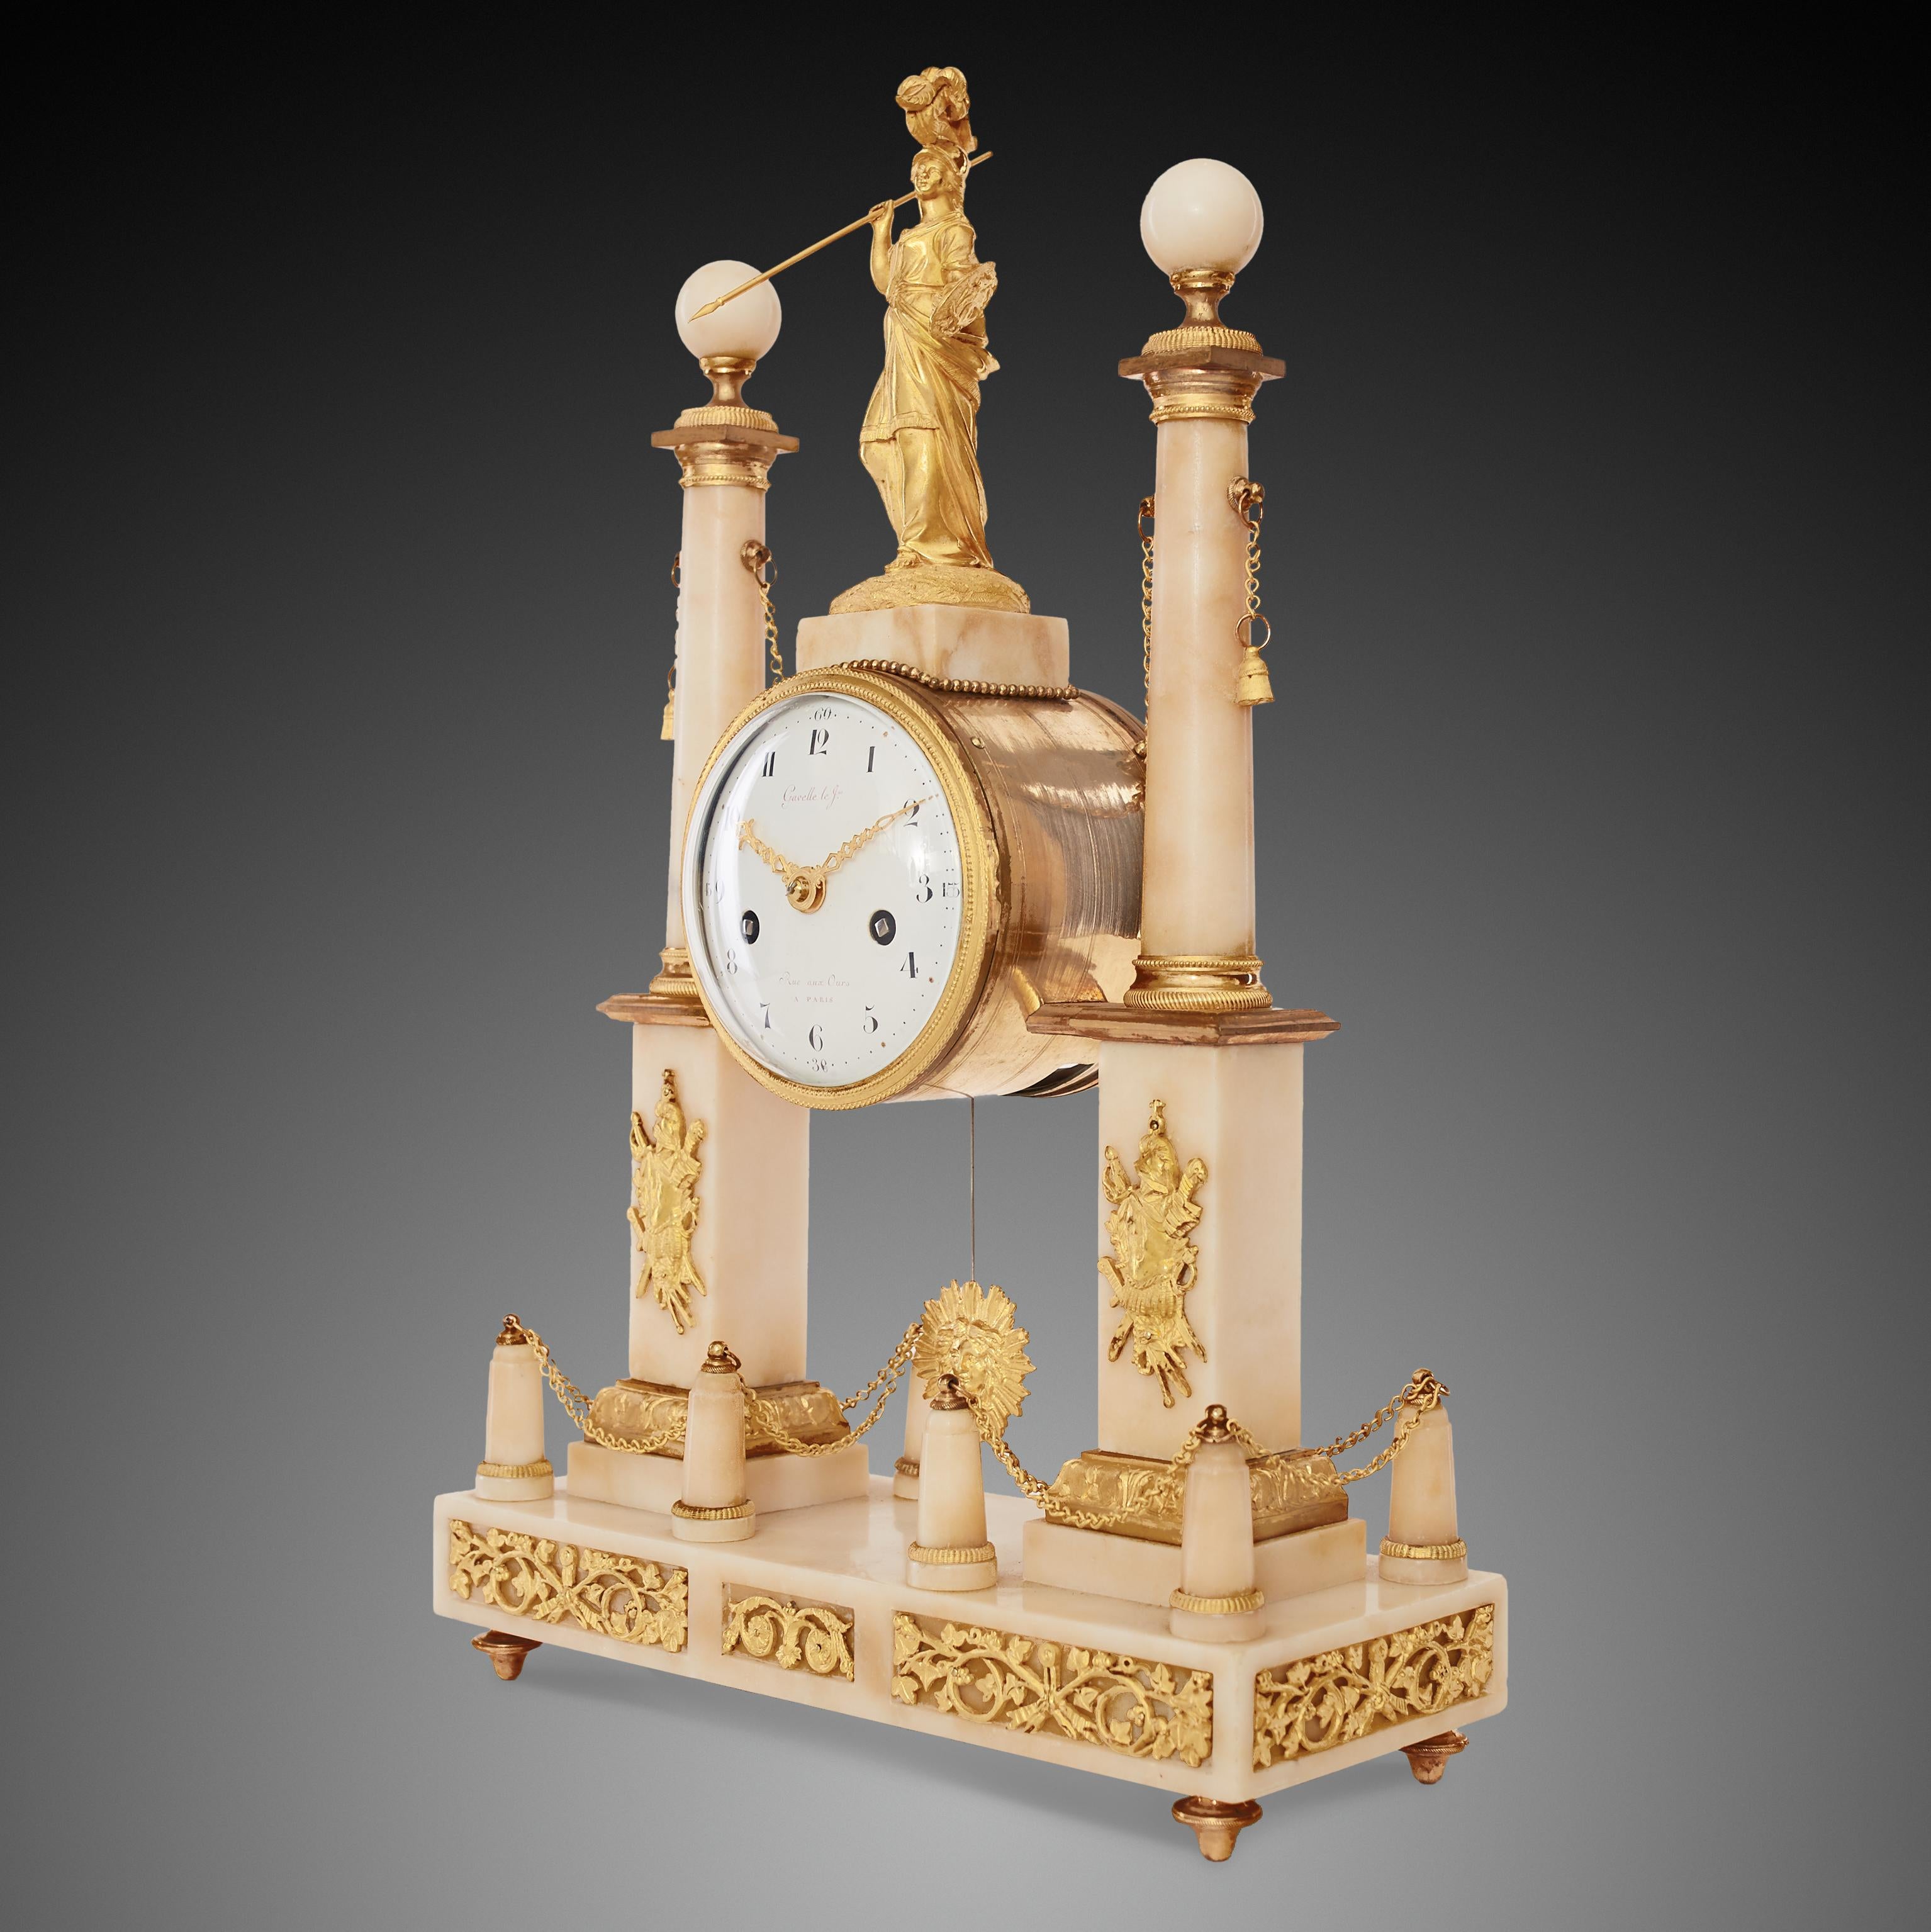 Antique French portico clock in Louis XVI style signed on the dial Gavelle Le, Rue aux Ours. This 18th c. style marble clock is composed of two columns in a shape of a obelisks in white marble and a statue of Goddess Minerva/Athena as well as